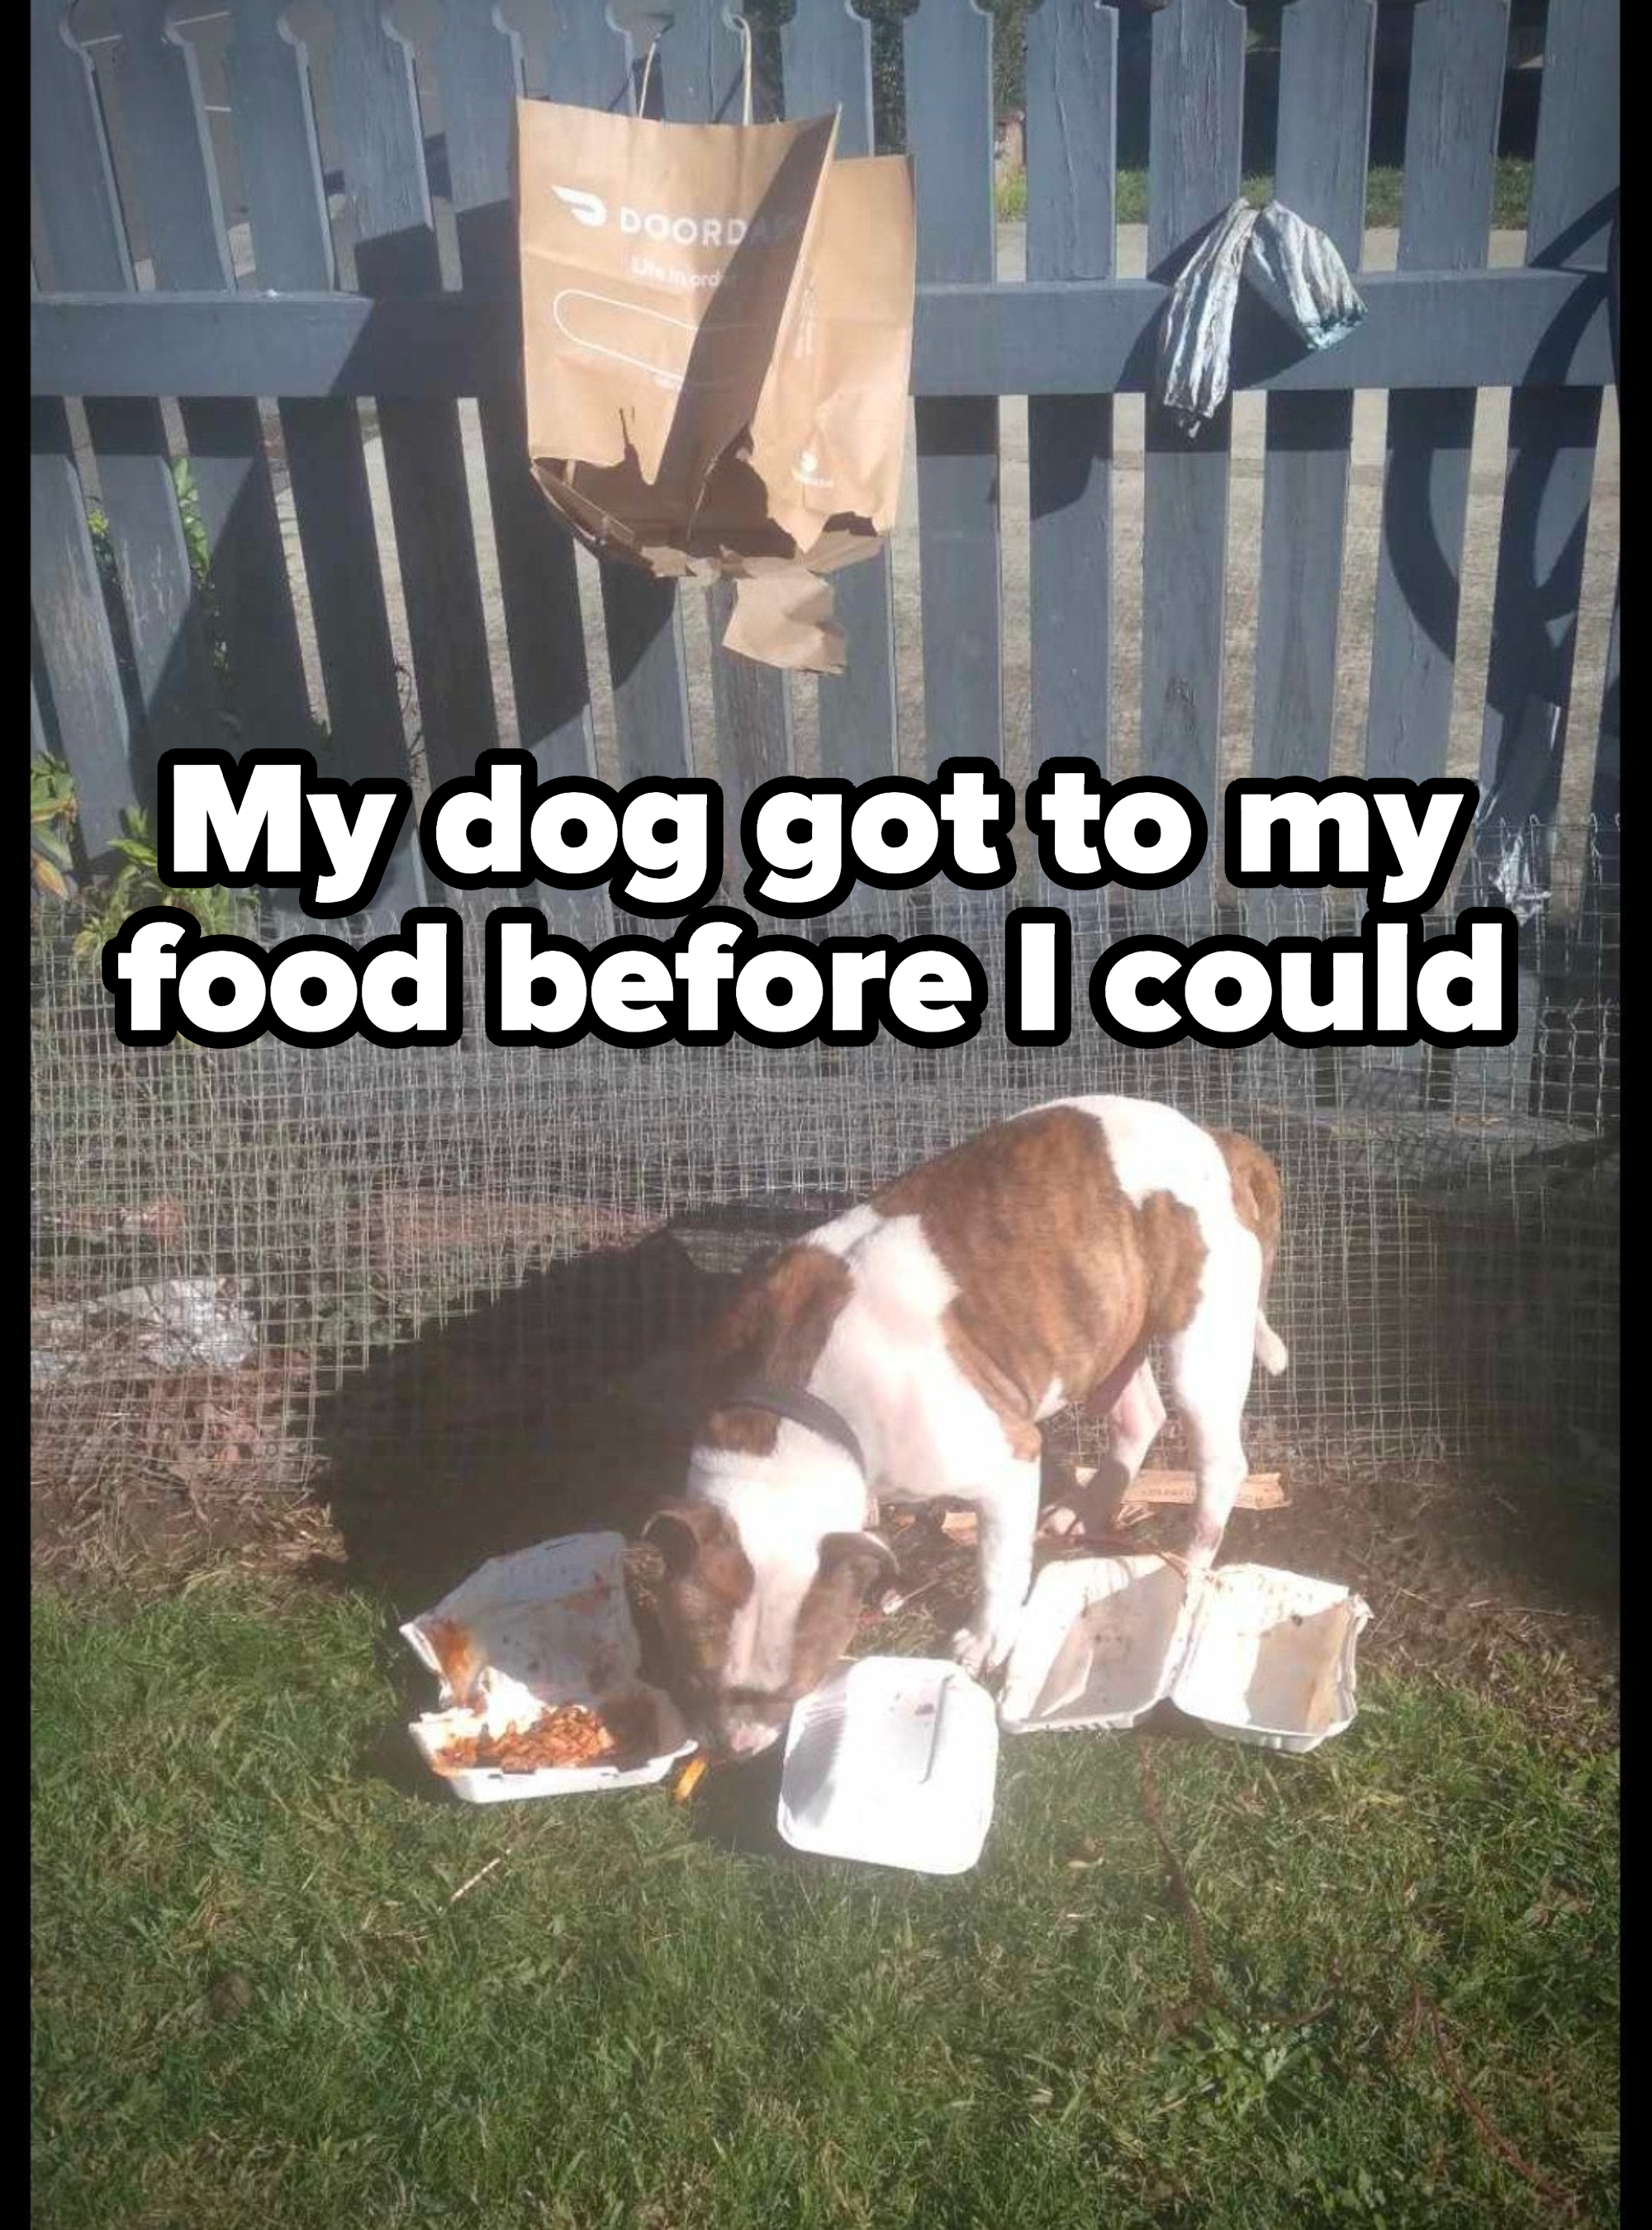 A DoorDash paper bag with a hole in the bottom hanging from a fence, and a dog eating the remnants of a takeout order on the grass below, with the caption &quot;My dog got to my food before I could&quot;